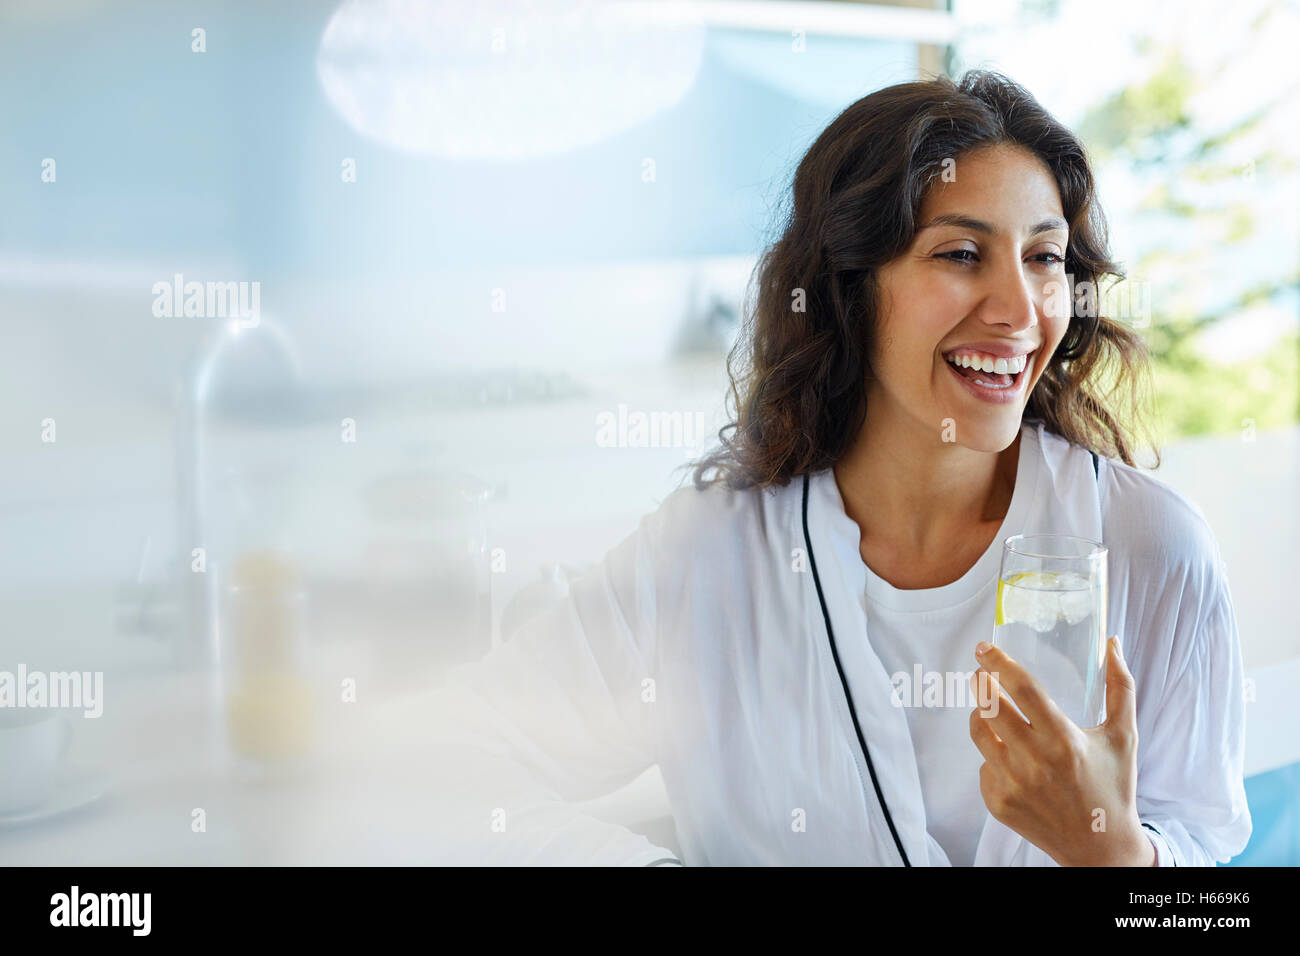 Laughing woman in bathrobe drinking water Stock Photo